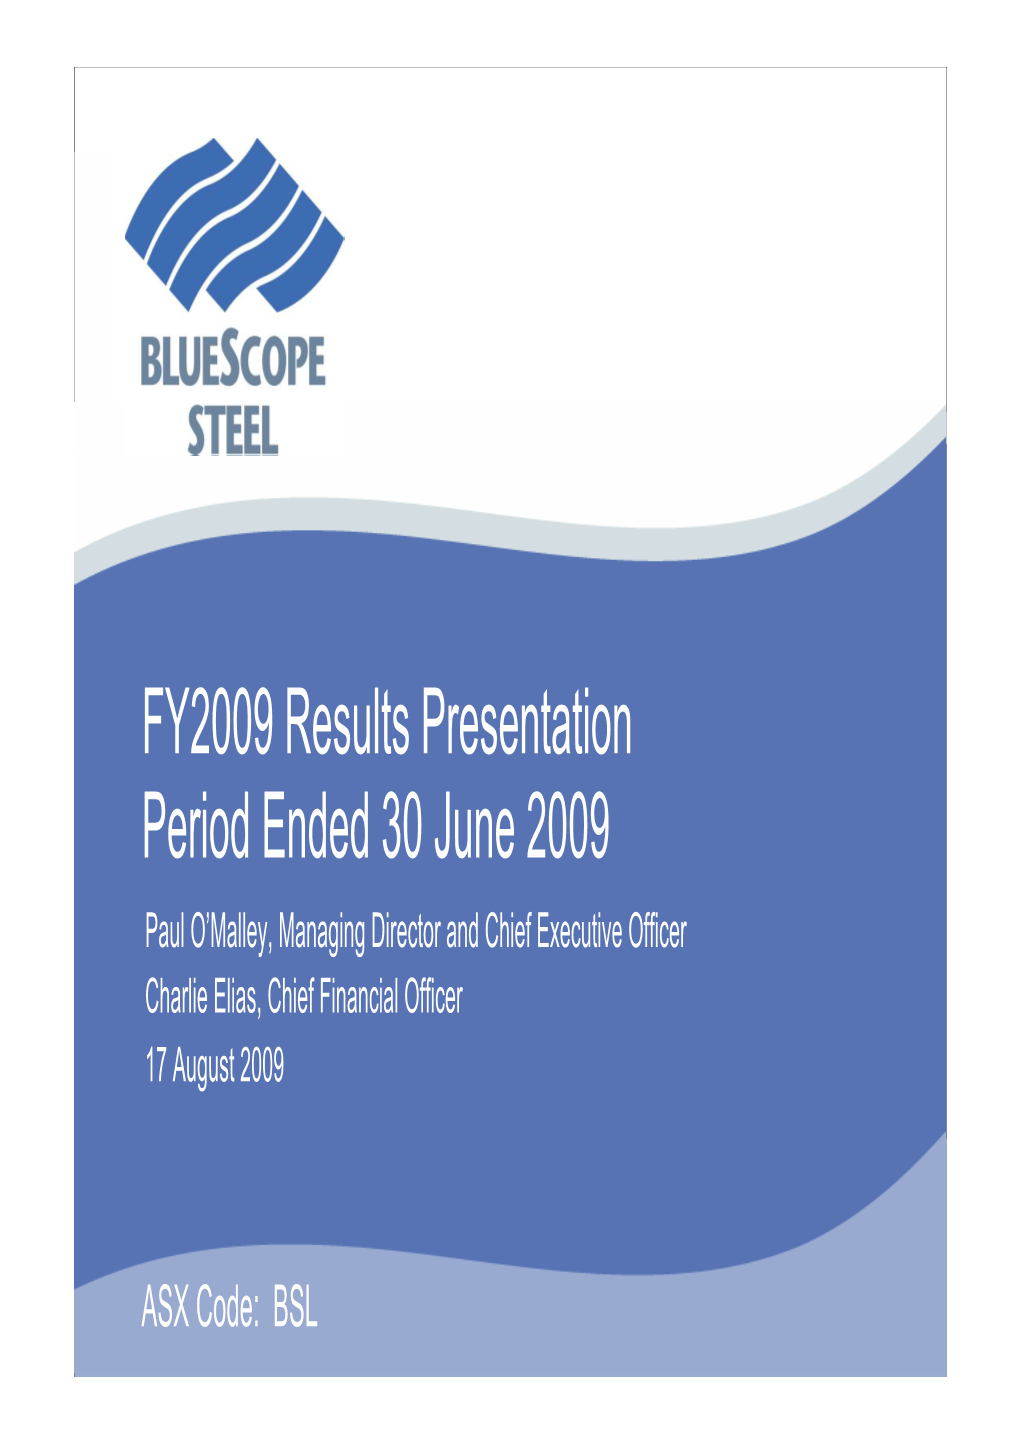 FY2009 Results Presentation Period Ended 30 June